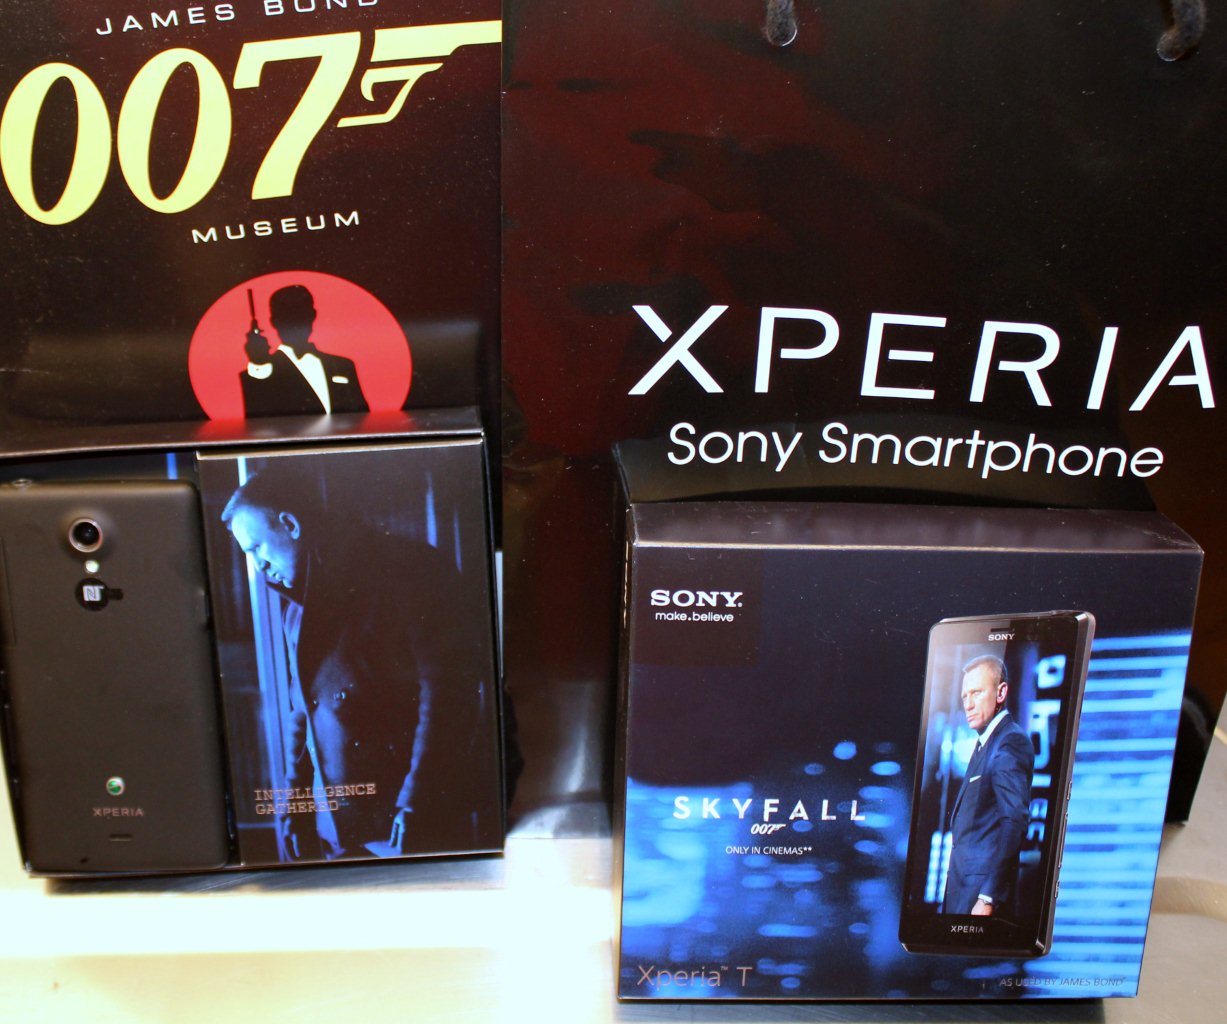 Sony Xperia T is James Bond smartphone in Skyfall to The James Bond Museum Nybro Sweden